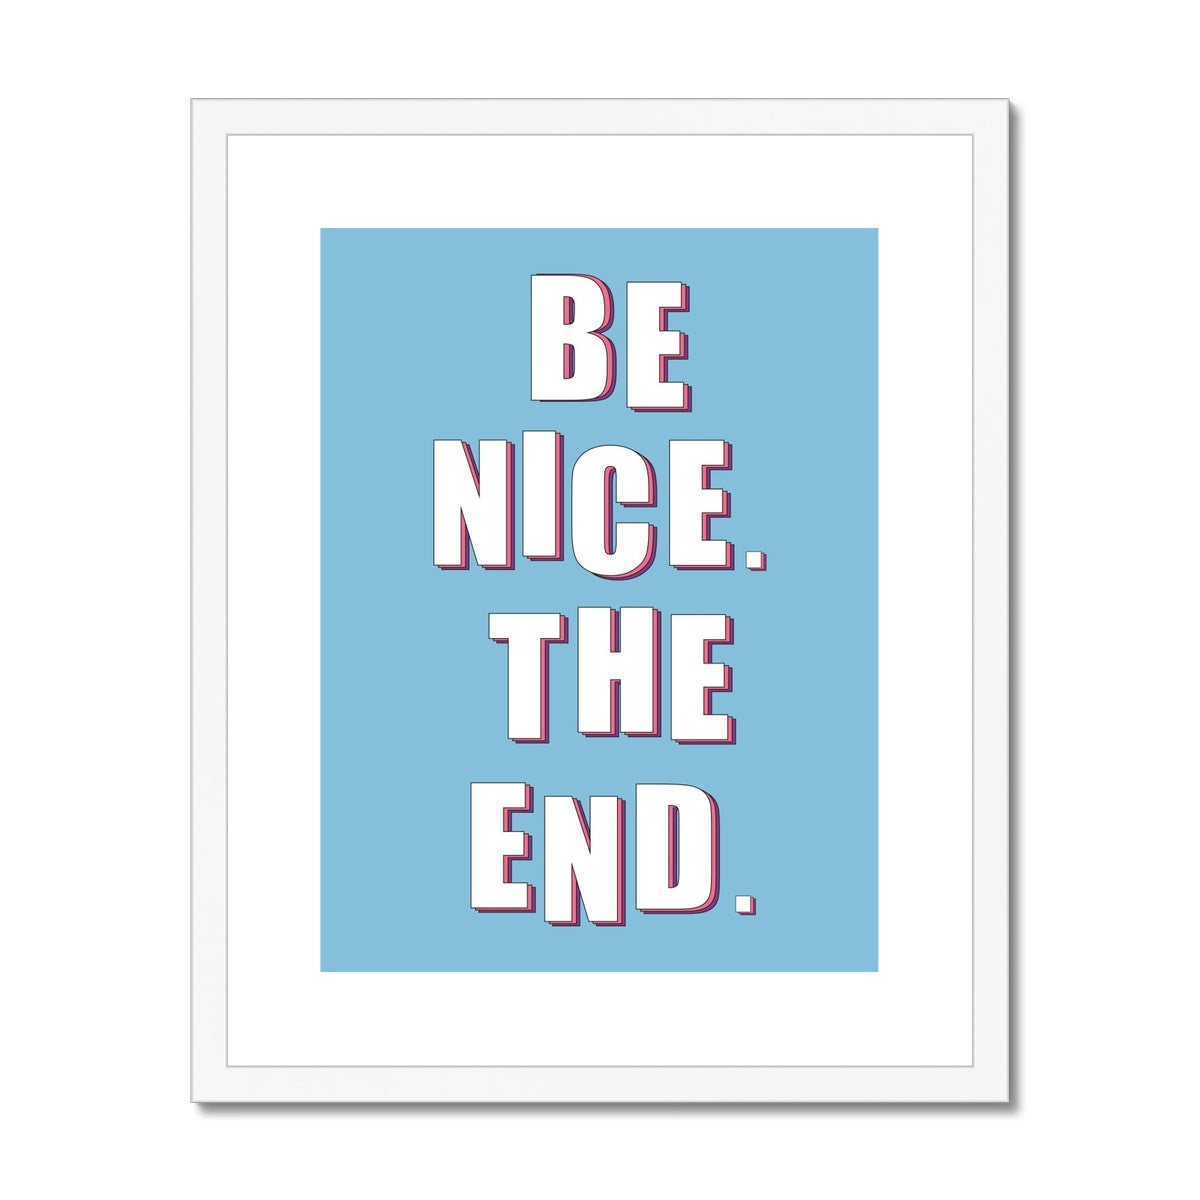 Be Nice. The End Framed & Mounted Print